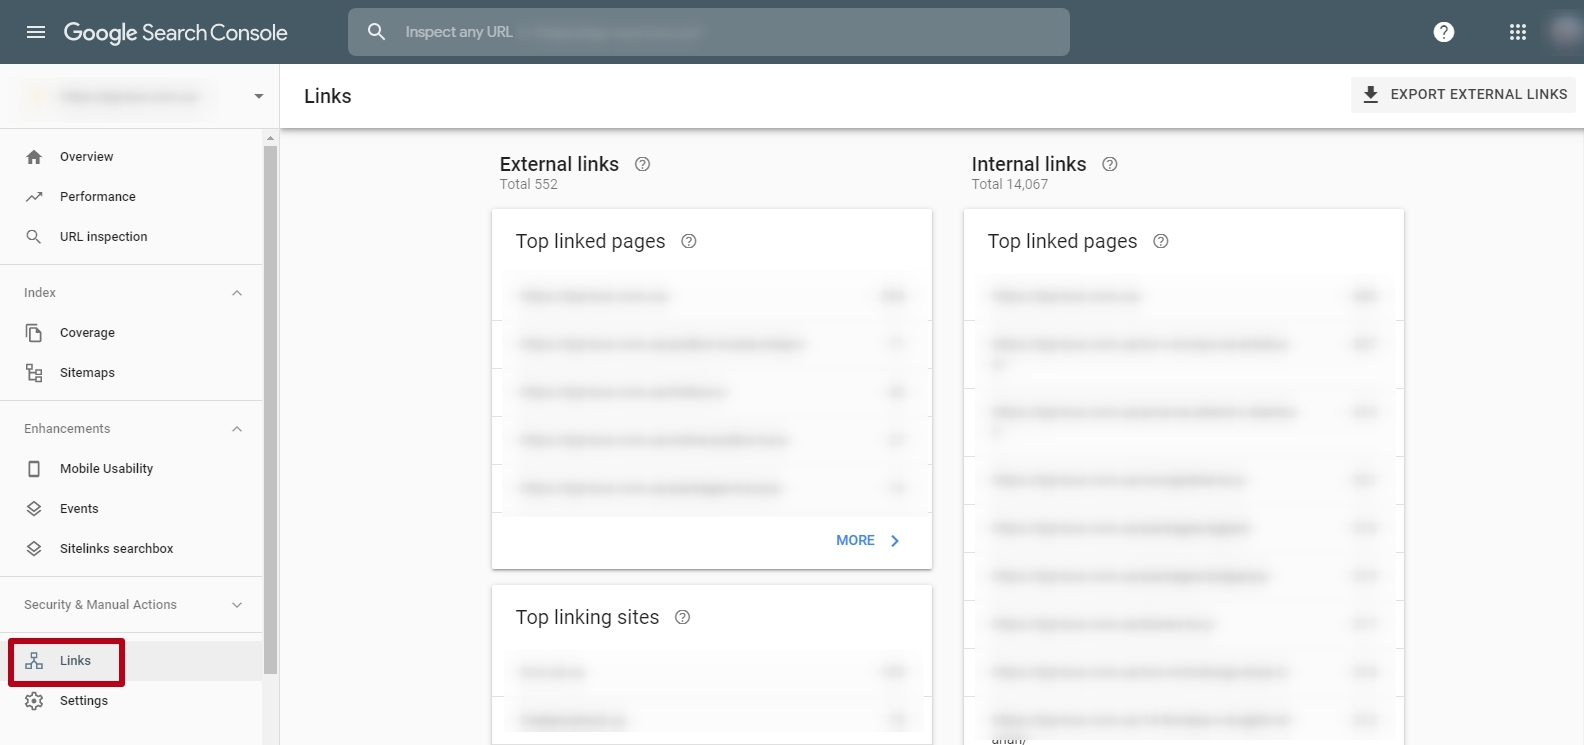 link analysis in the Search Console